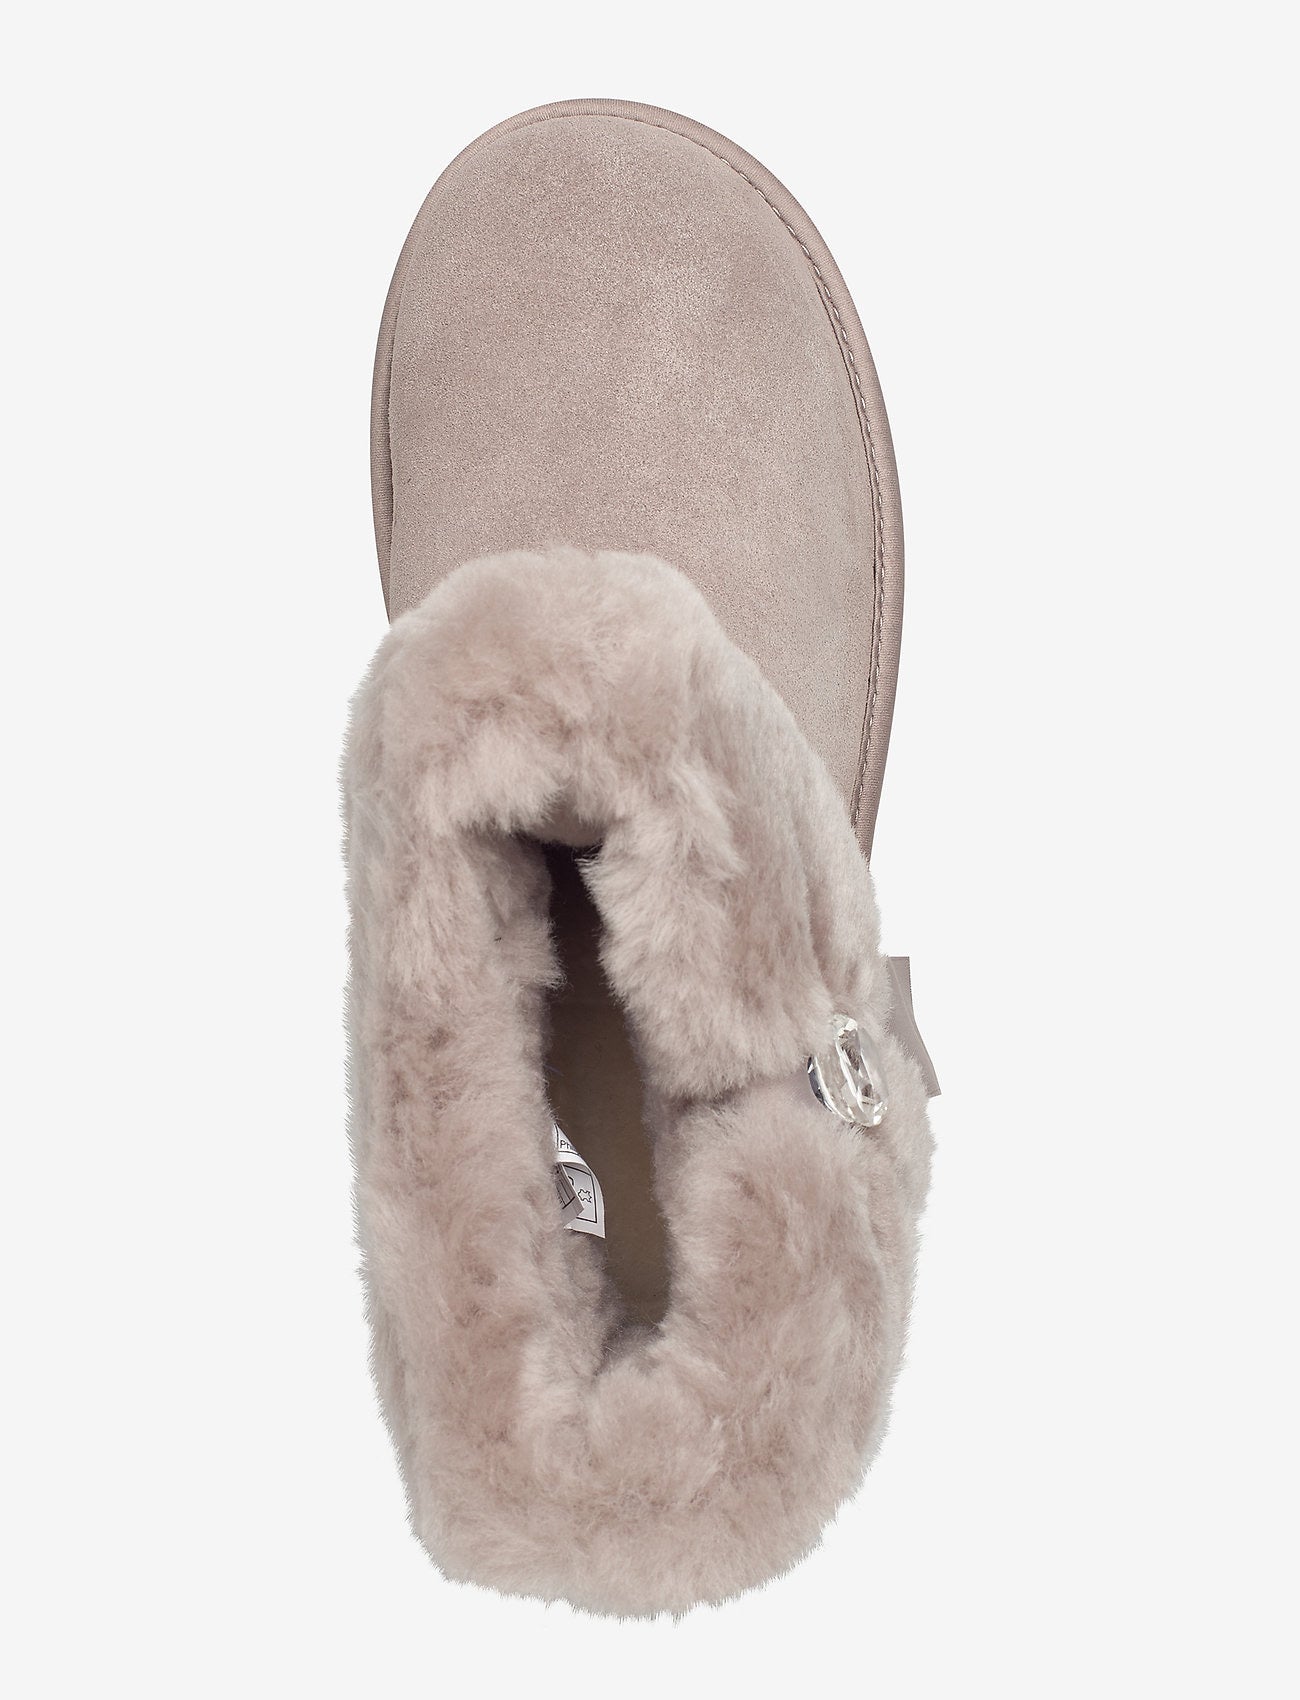 UGG Womens Cinched Fur Mini Boot - Oyster